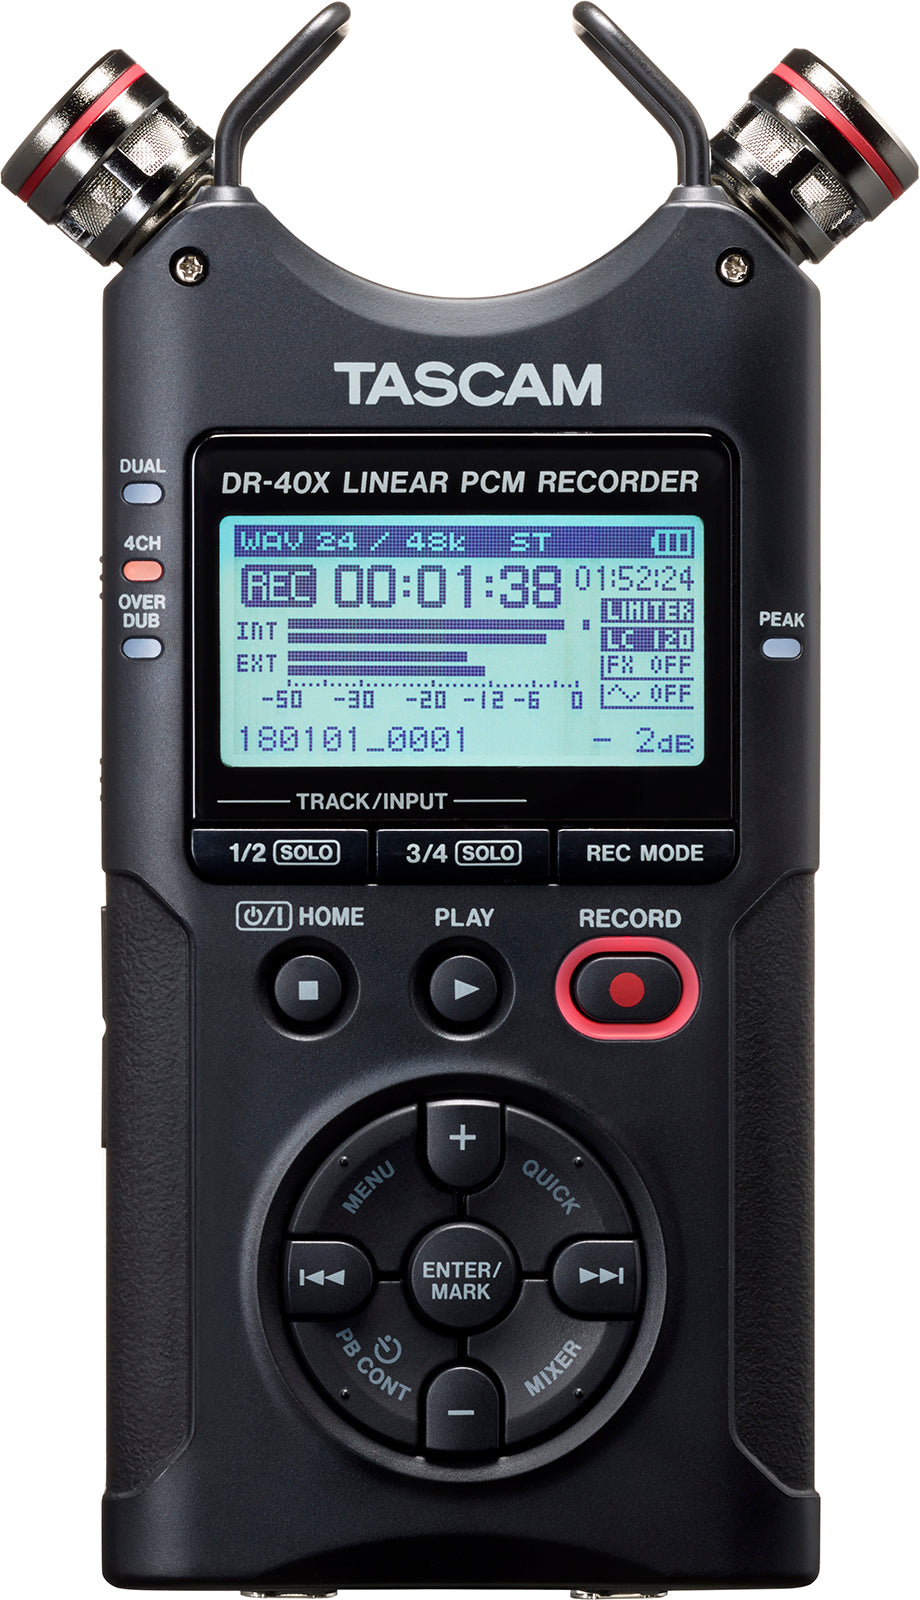 TASCAM DR-40X4 Channel Linear PCM Recorder with free Case